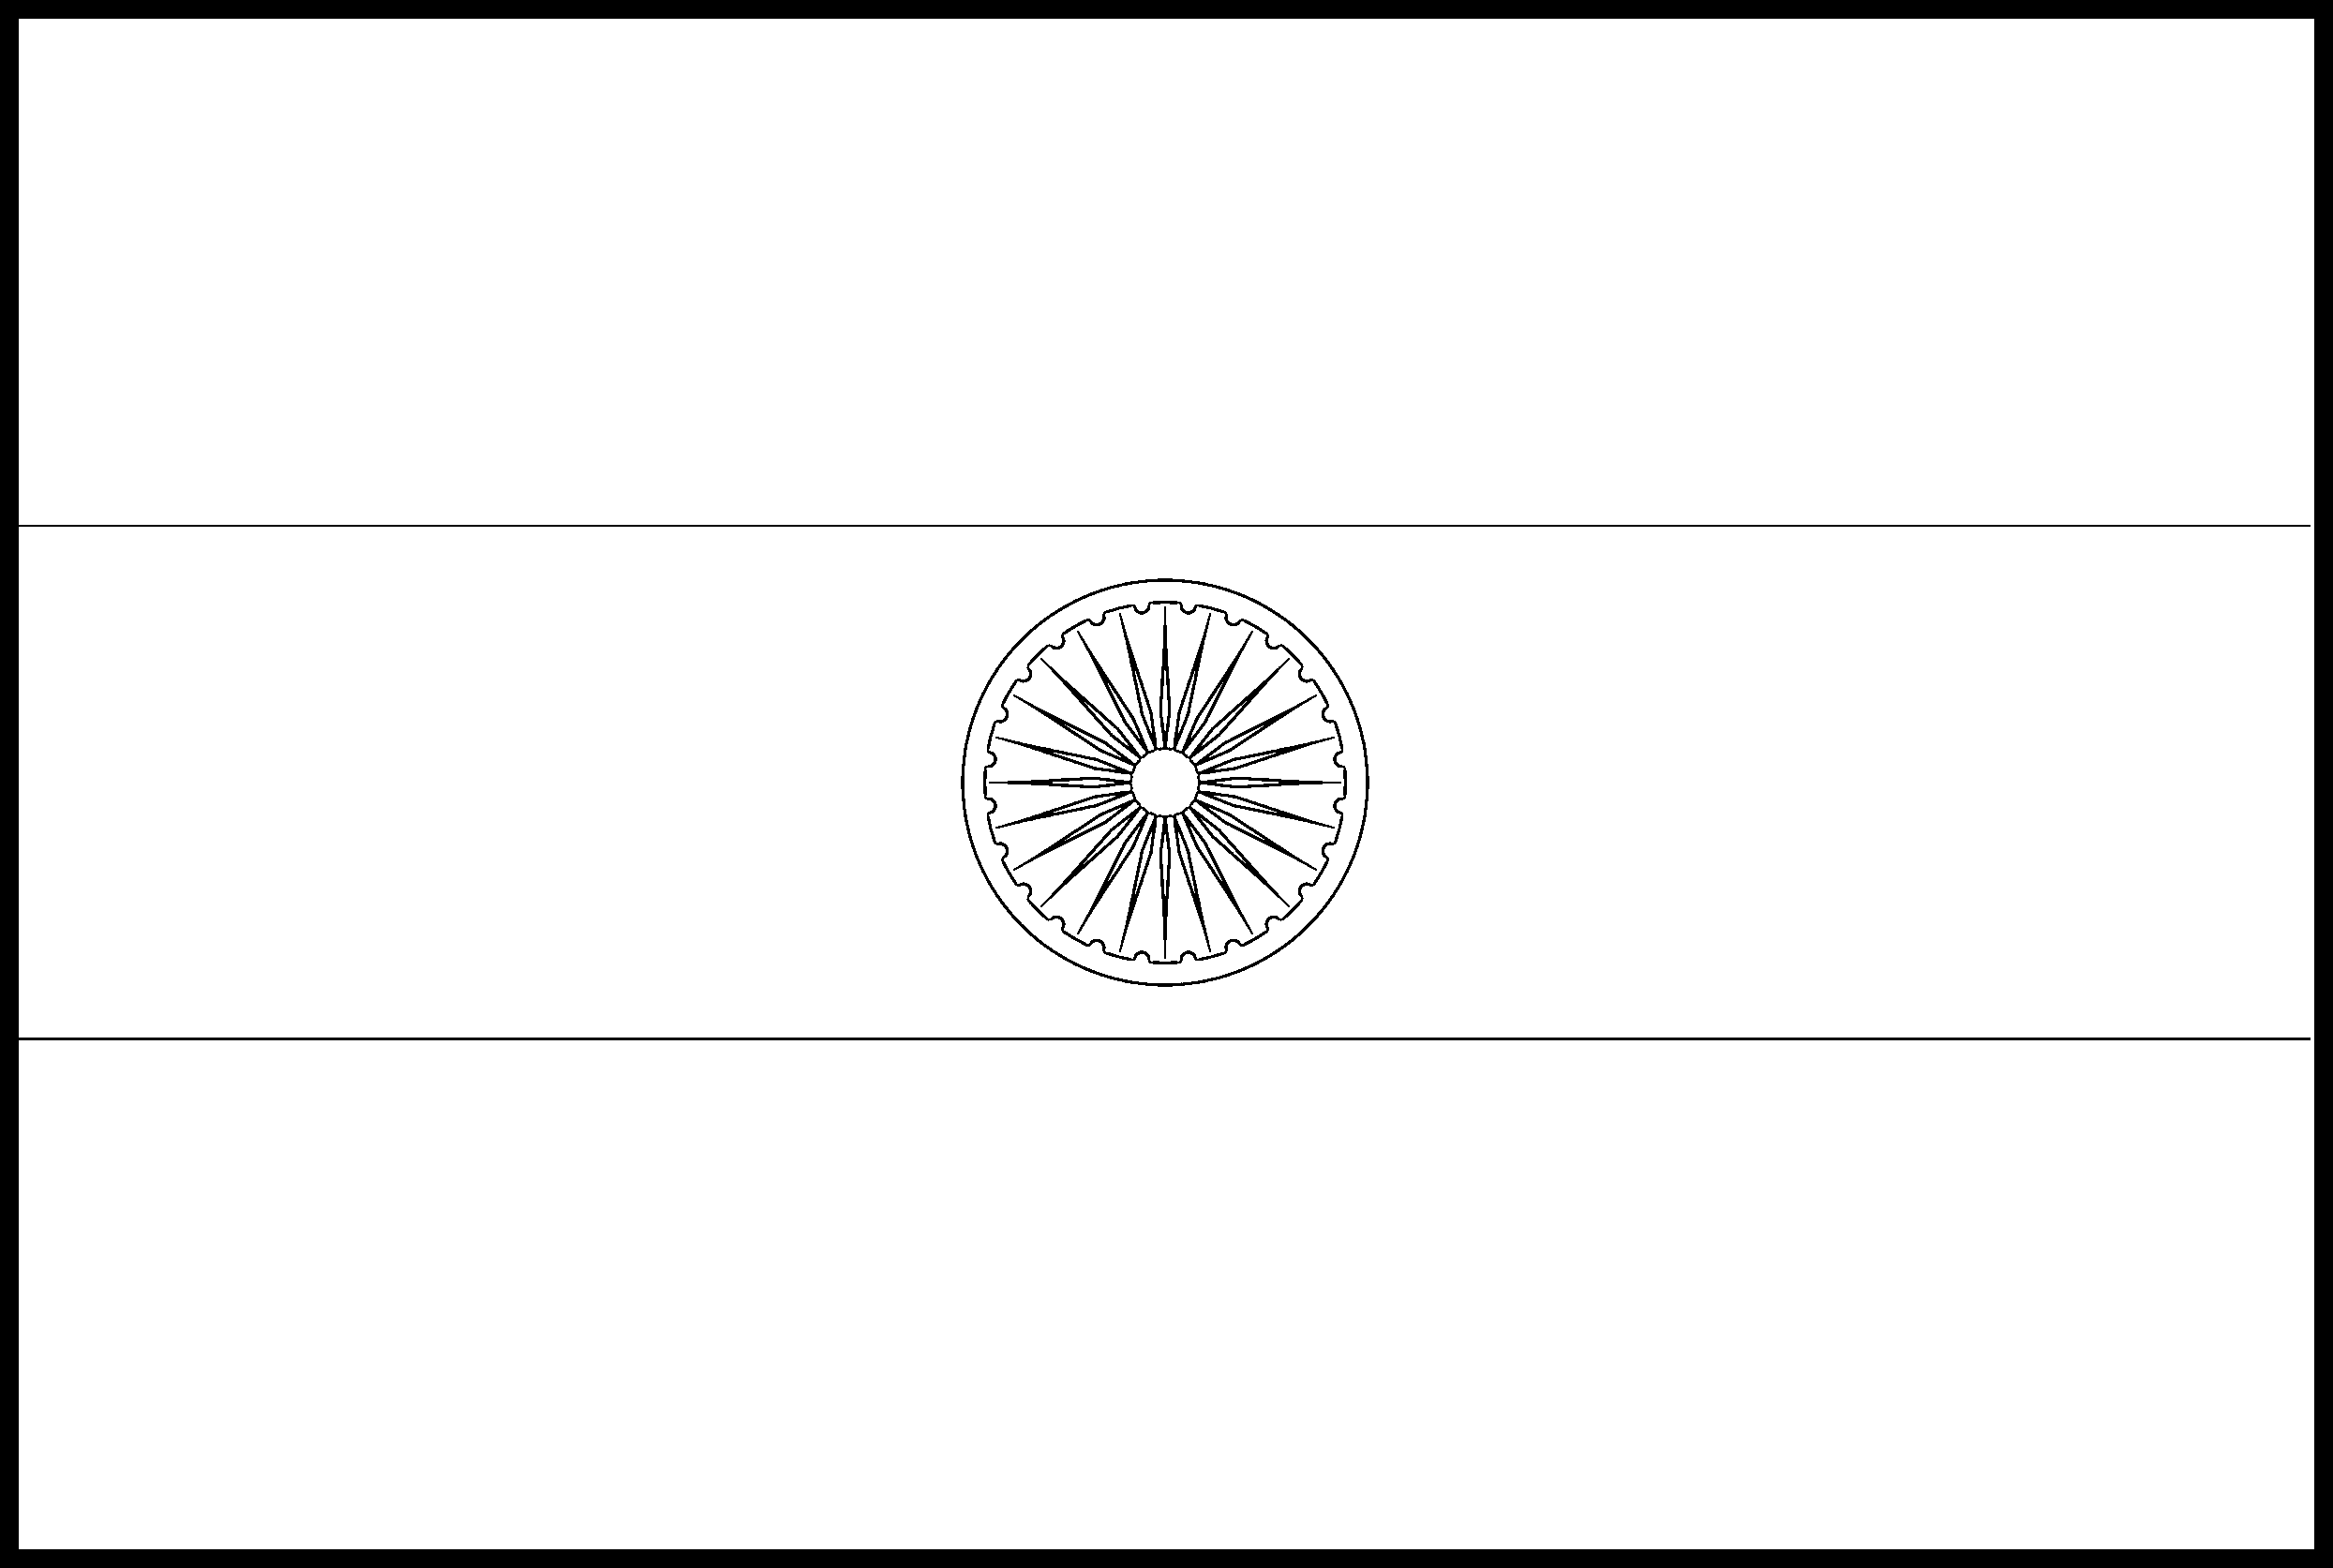 India flag colouring page â flags web